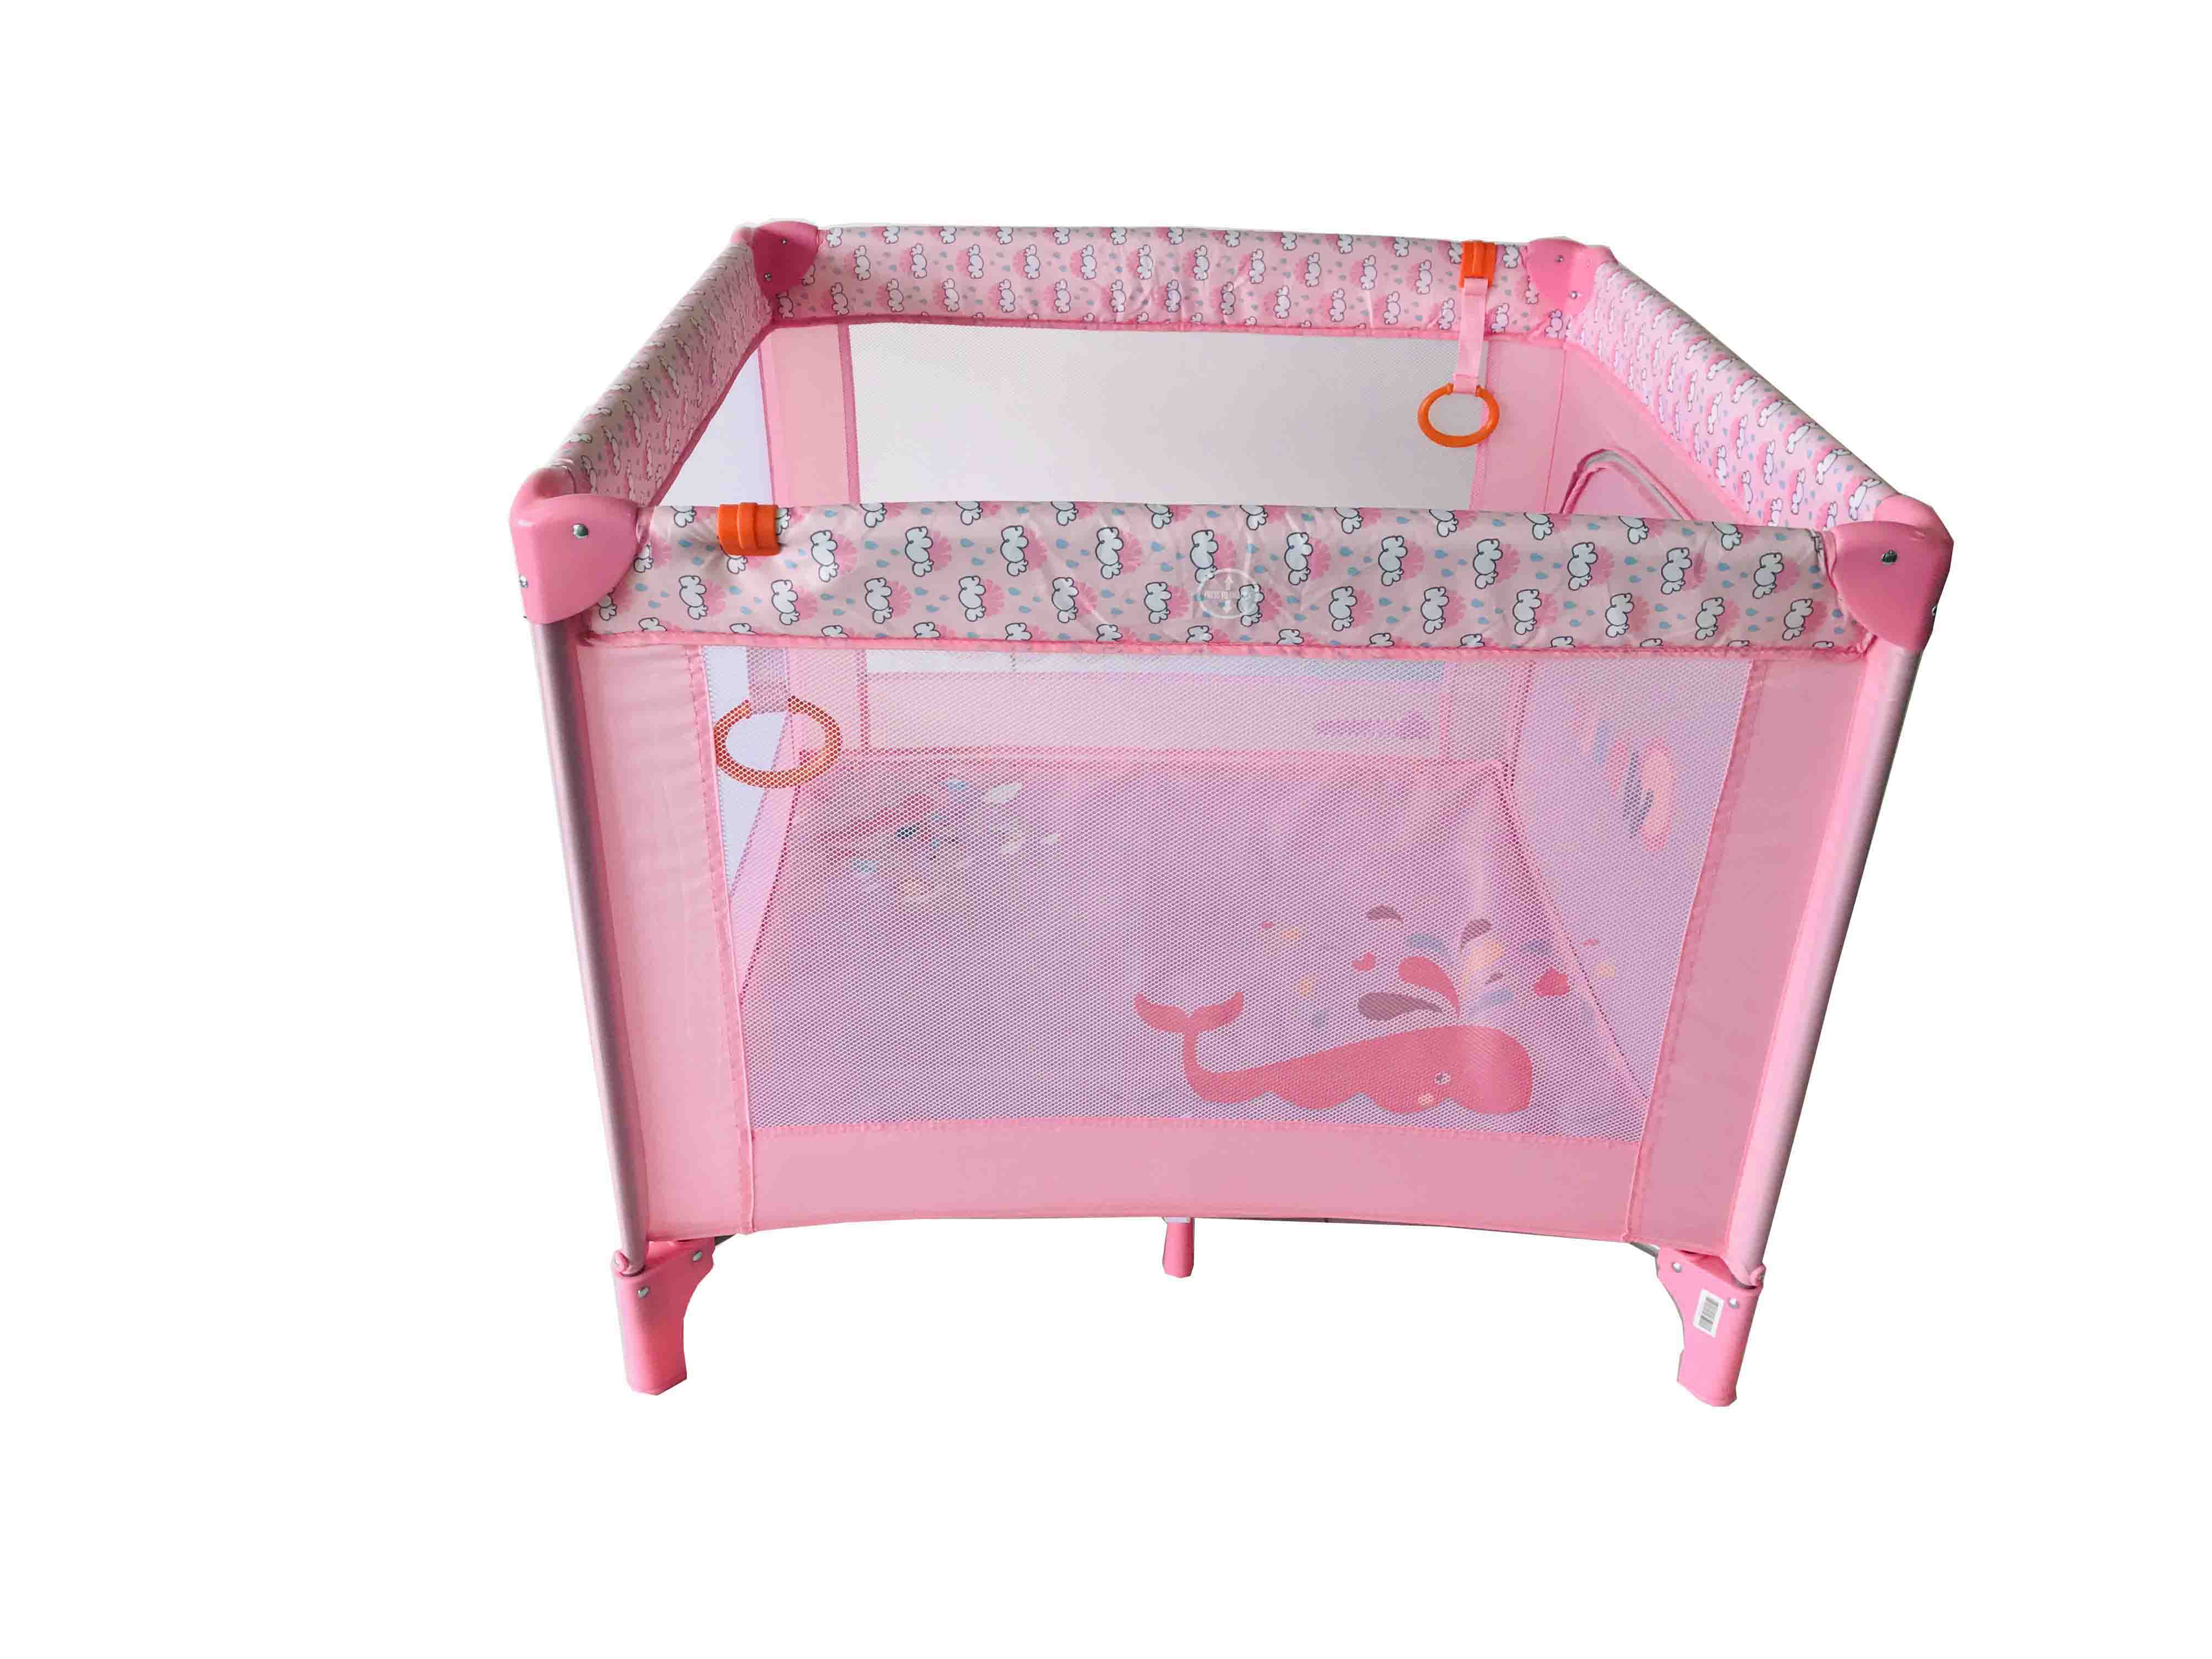 Square baby travel cot large baby play yard Factory